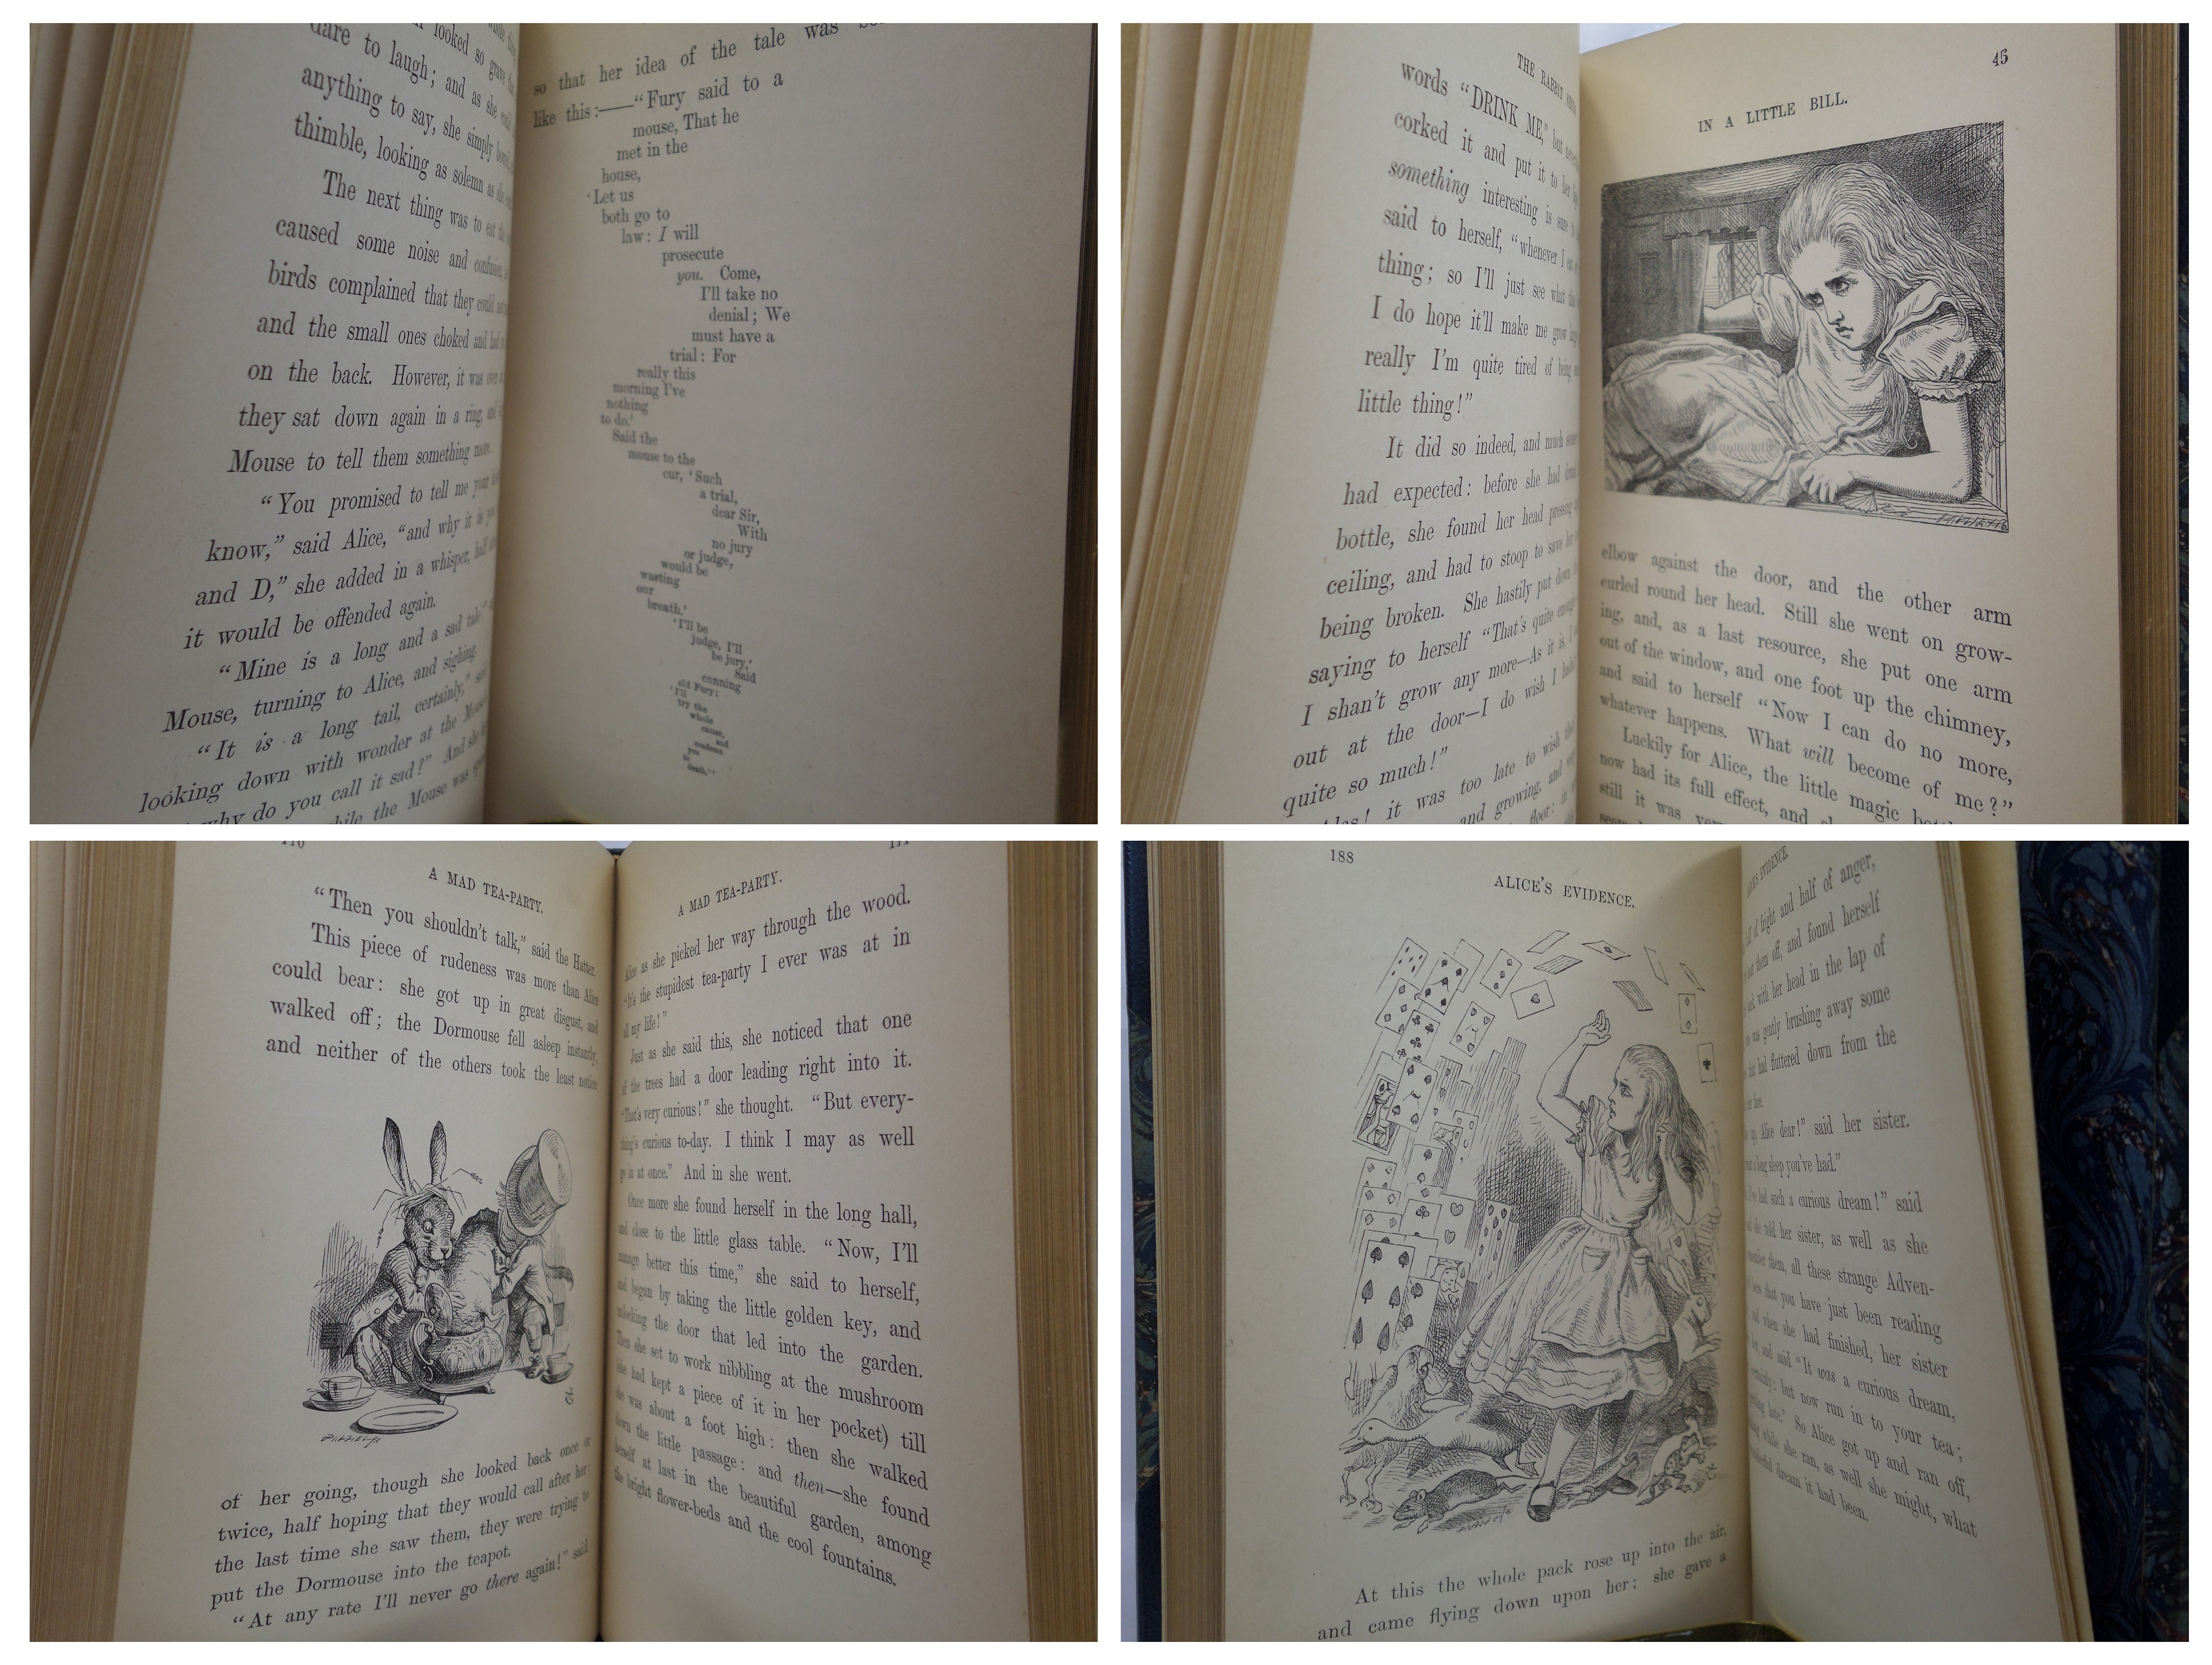 ALICE'S ADVENTURES IN WONDERLAND BY LEWIS CARROLL 1886 FINE LEATHER BINDING BY ROOT